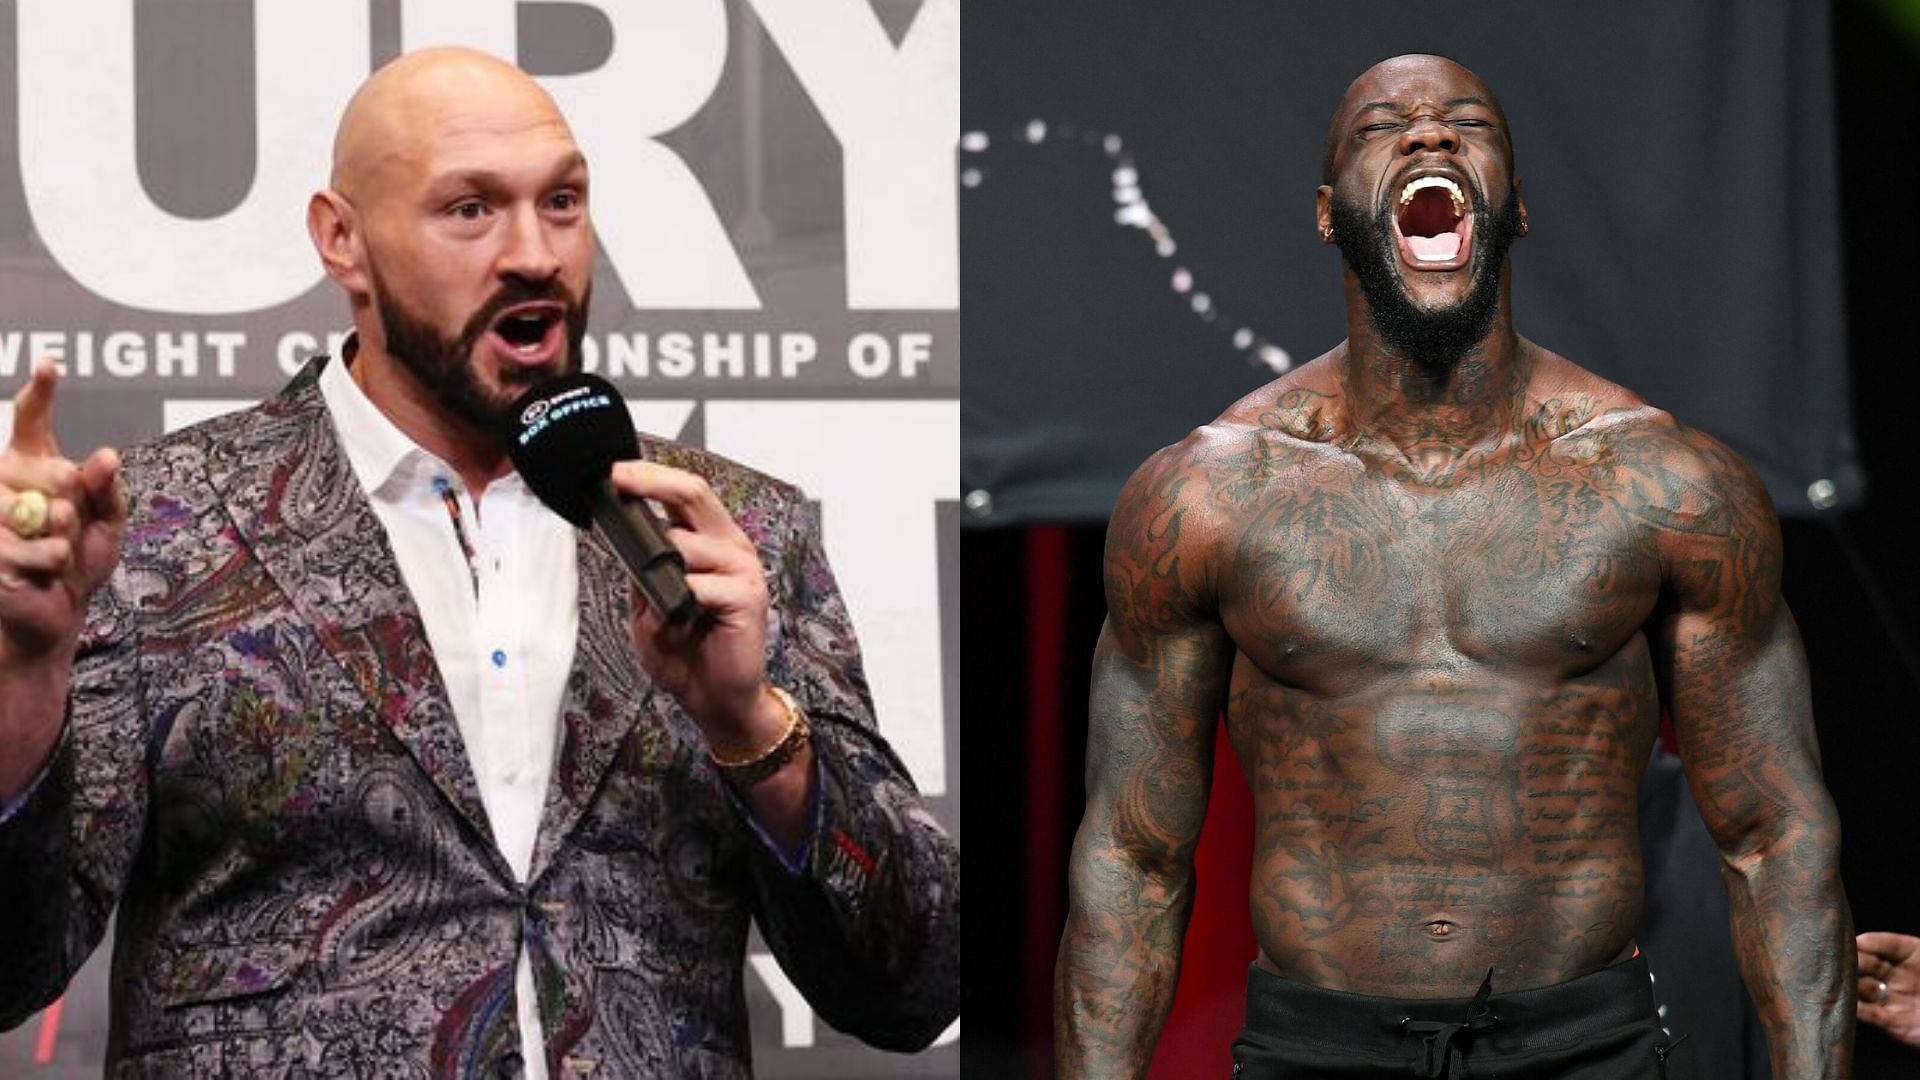 Tyson Fury (left) and Deontay Wilder (right)